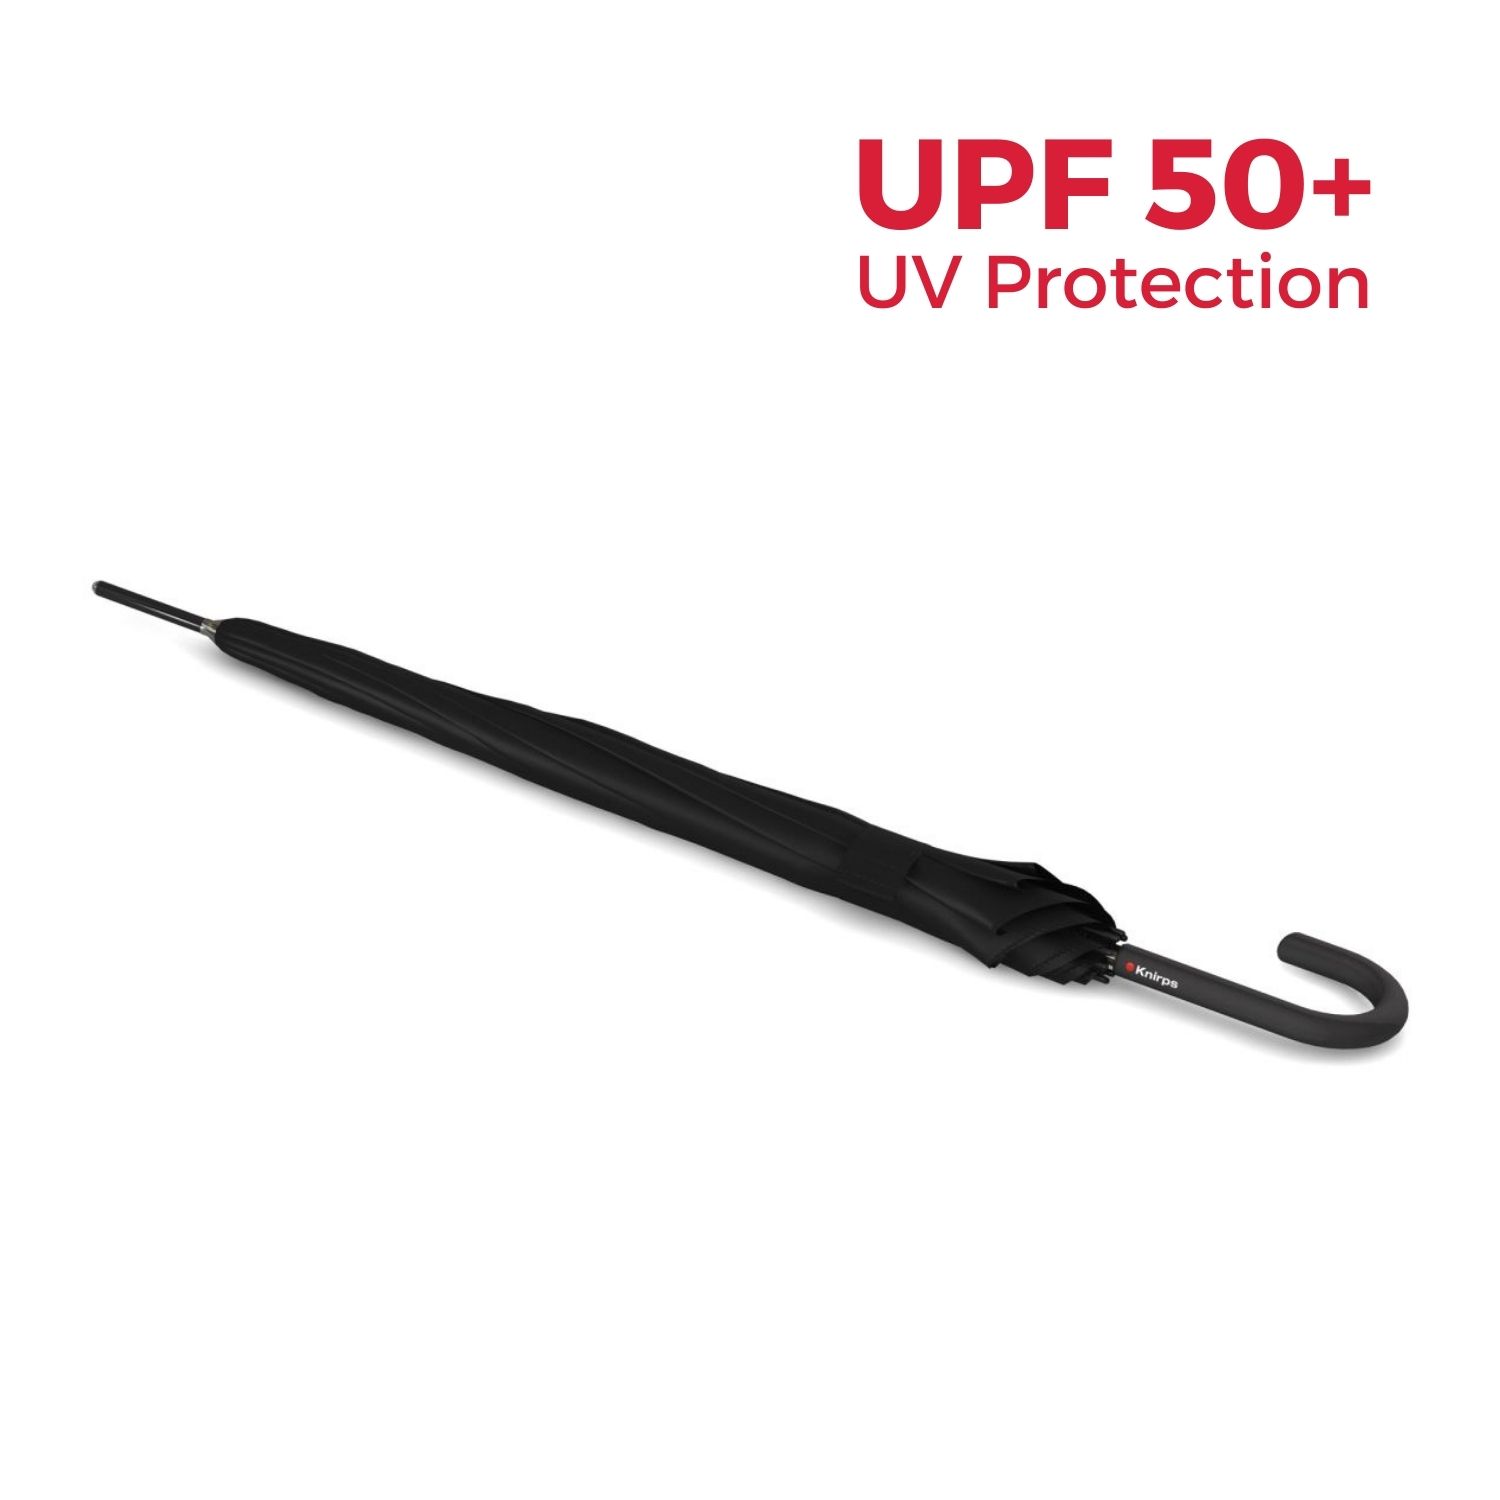 Buy Knirps T.760 Stick Automatic Black MY The - Malaysia (UV Traveller - Protection) in Umbrella Planet